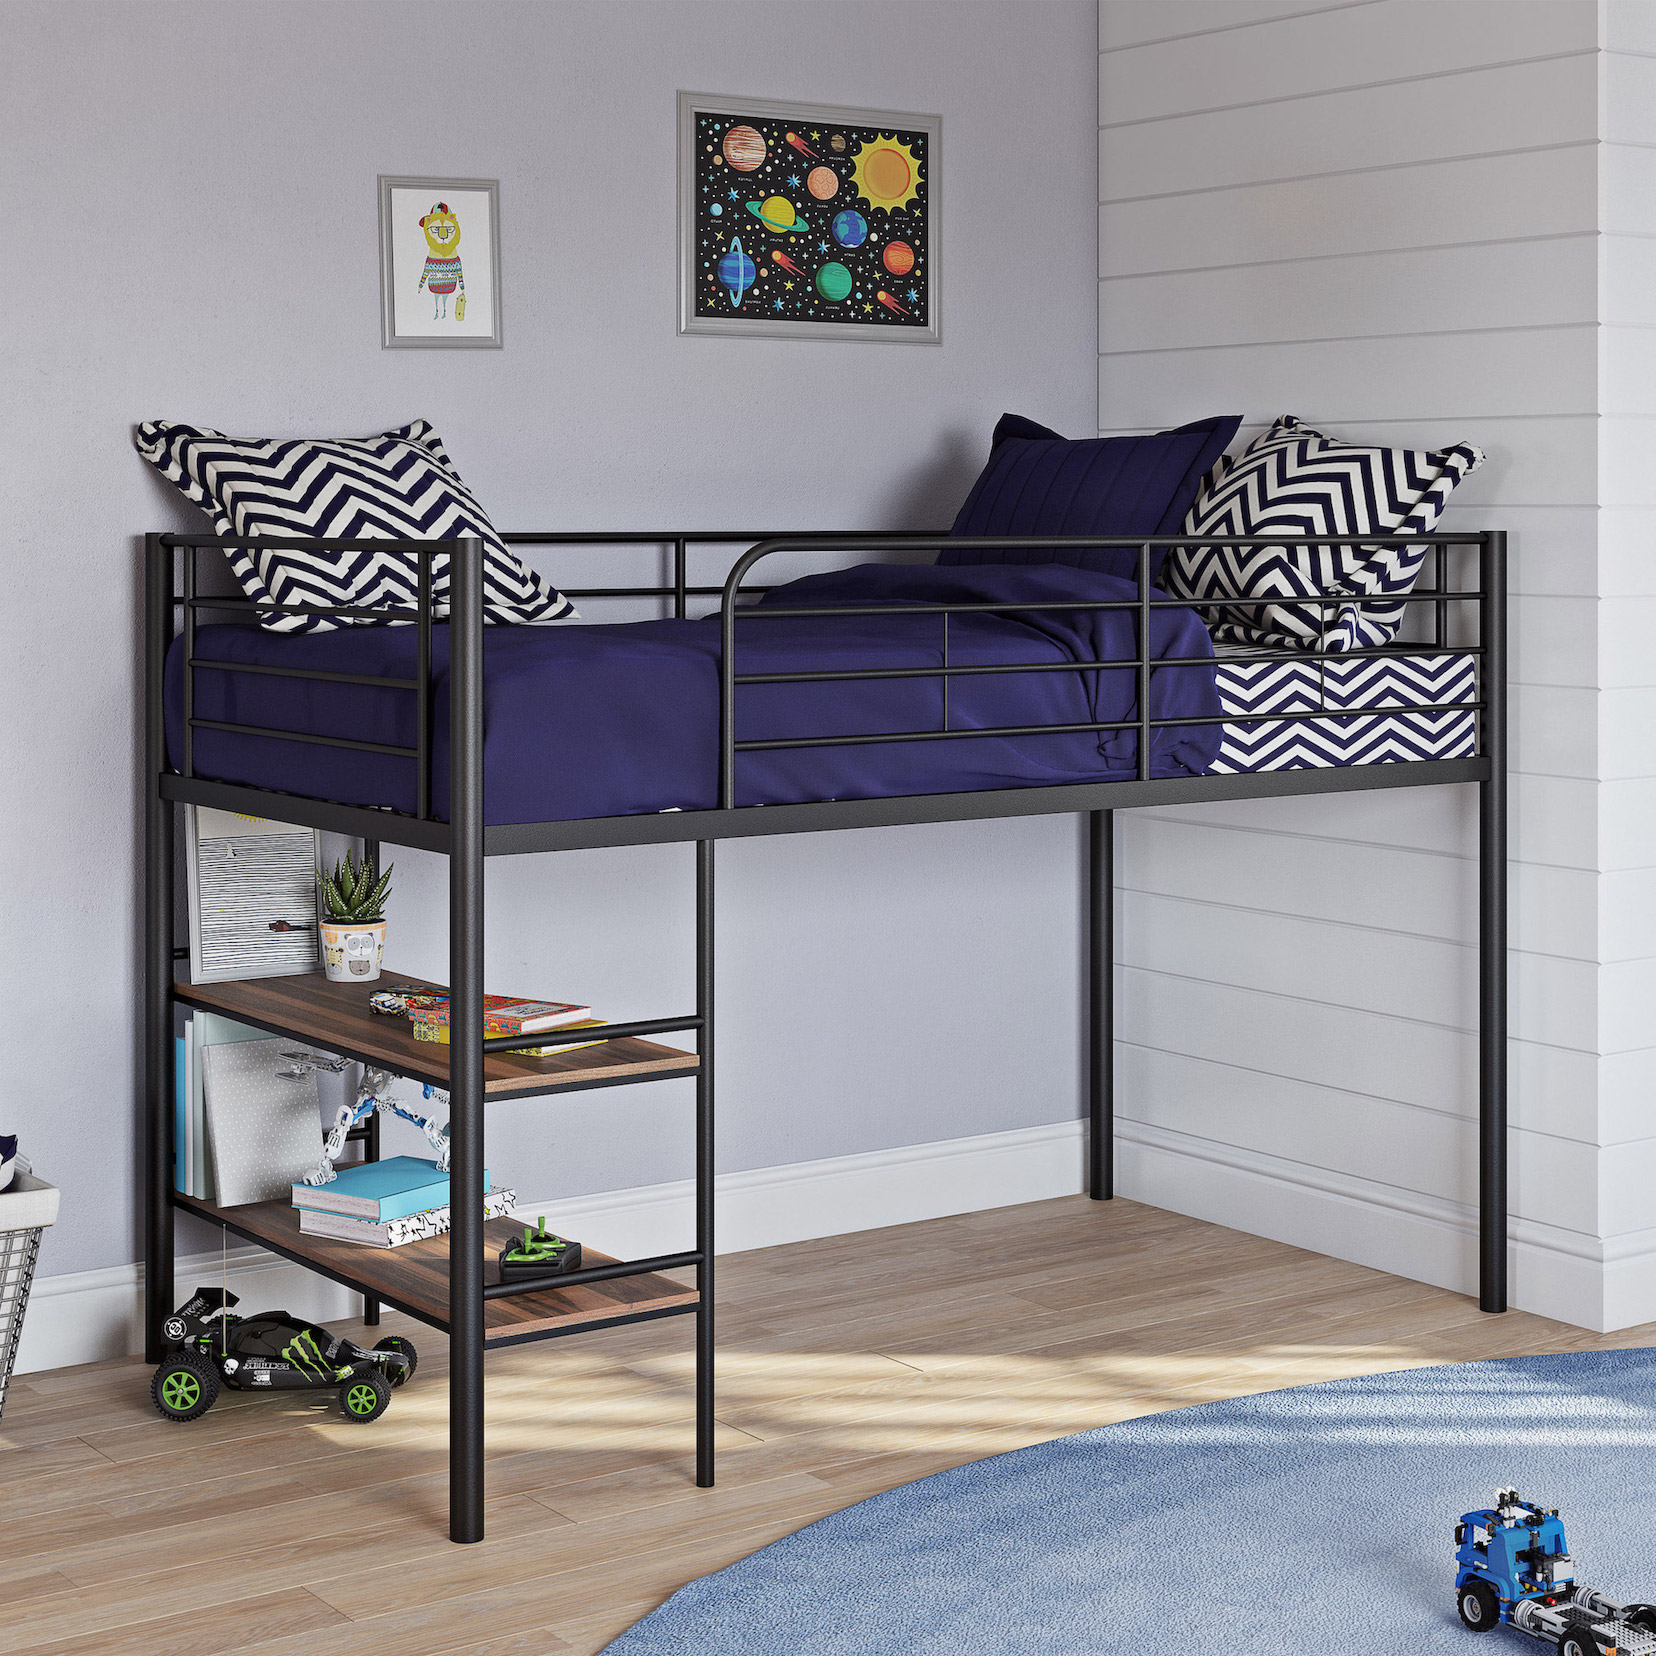 14 Space Saving Loft Beds Kids, What Age Can A Child Use Loft Bed